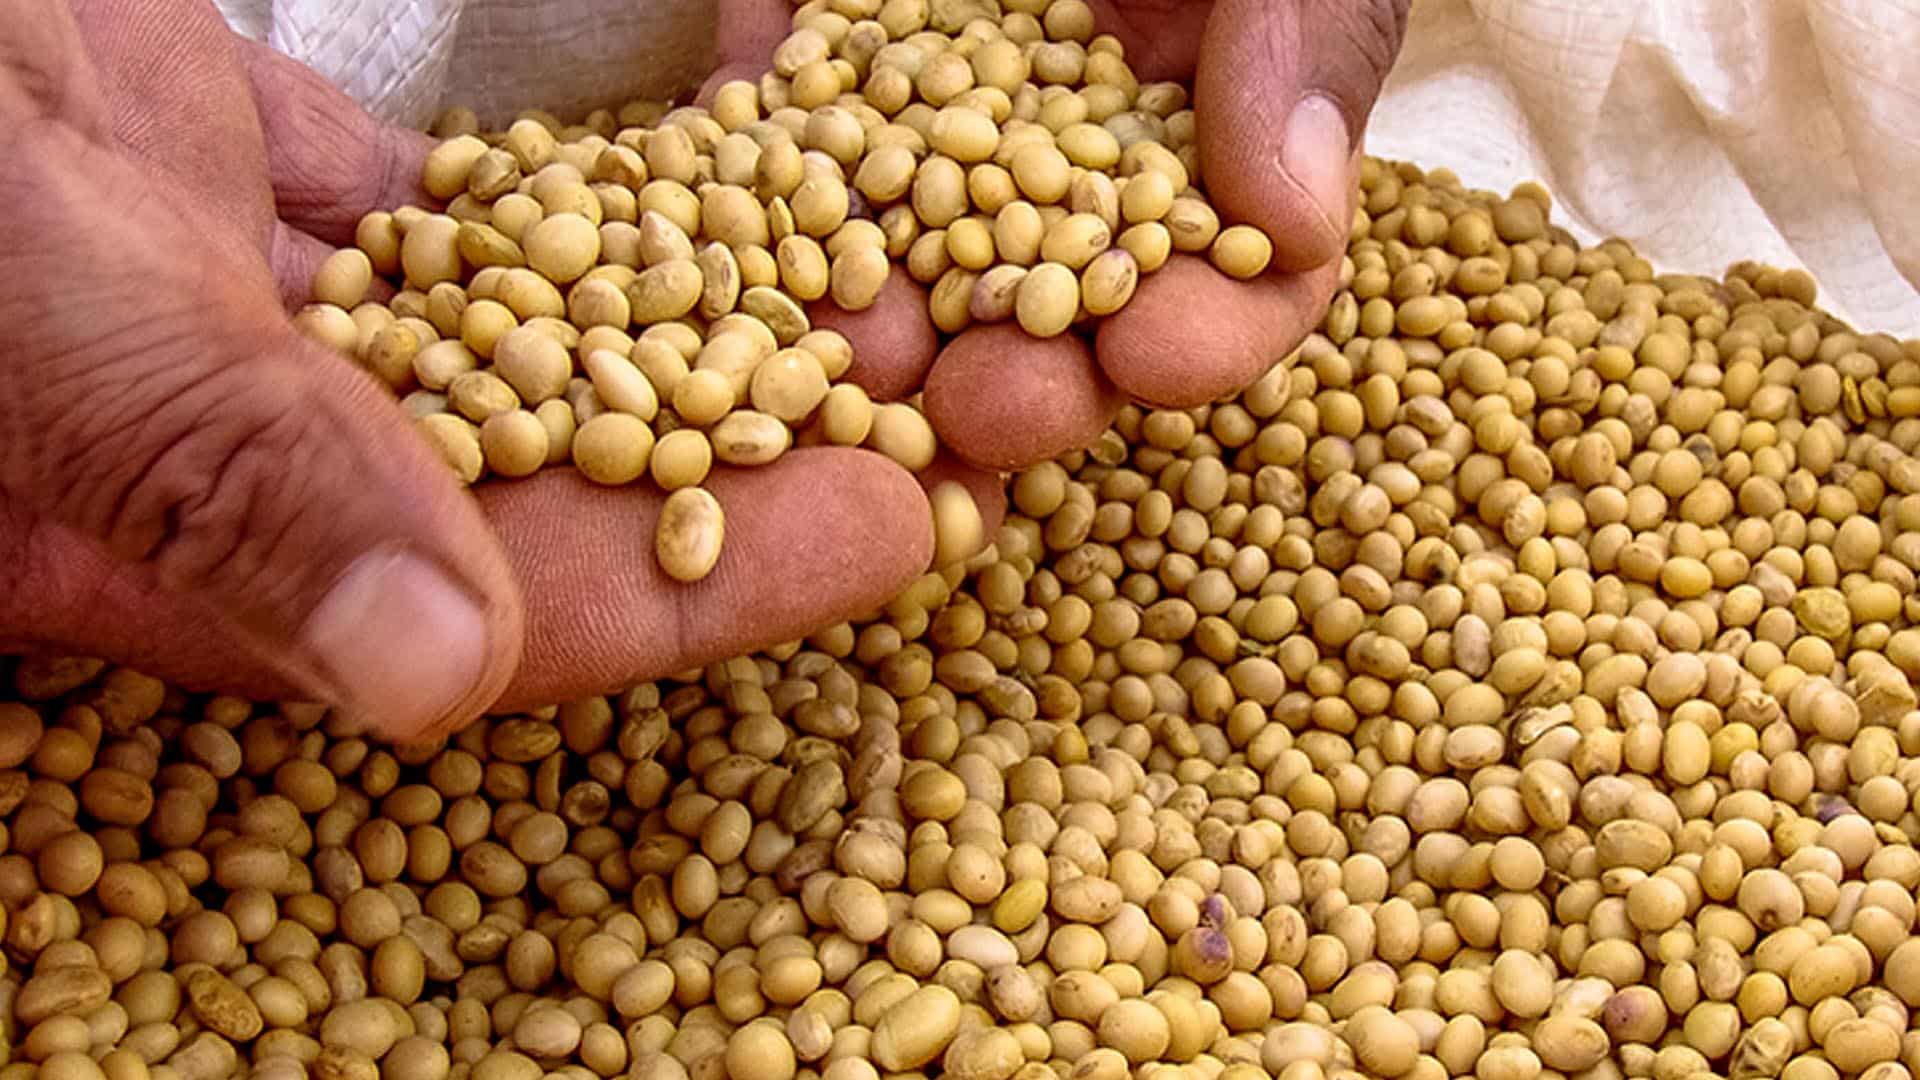 Wholesale Soybeans Suppliers and Distributors in the Middle East - Guide to Buy Soy beans in Bulk